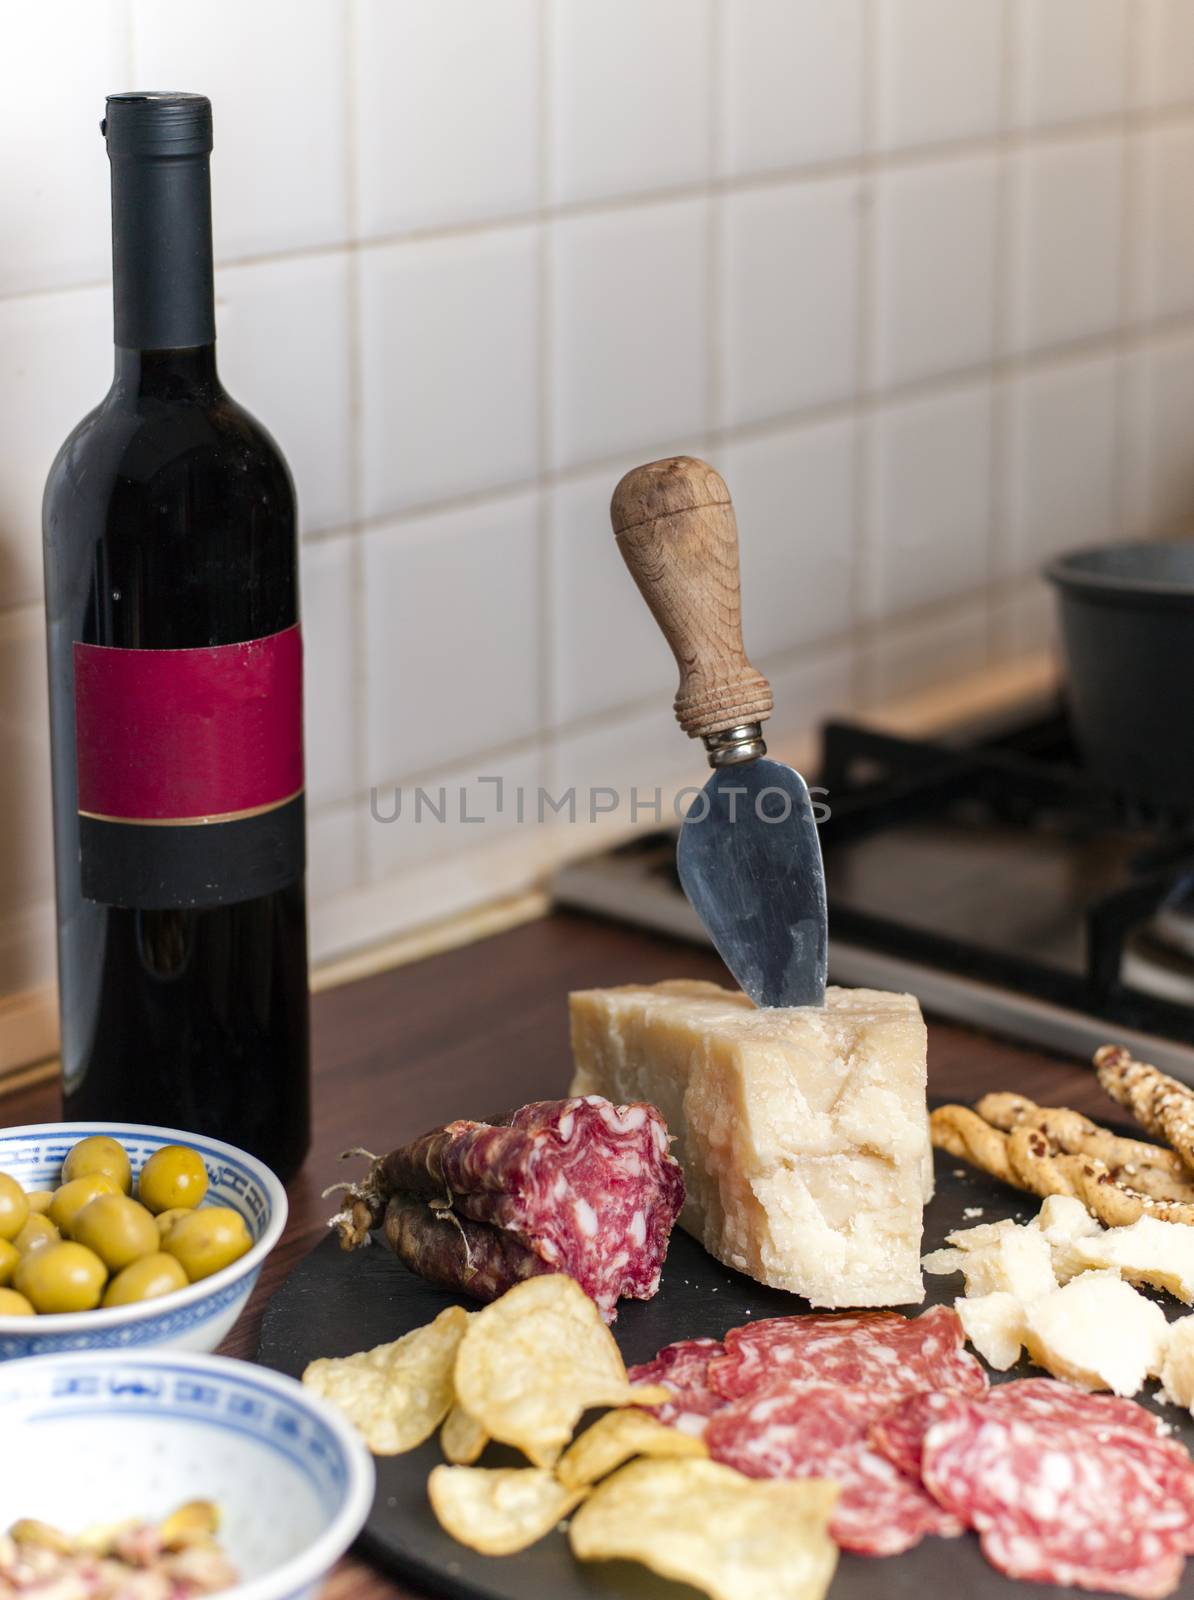 A dark stone tray on a wooden kitchen table filled with parmesan cheese, salami and potato chips.